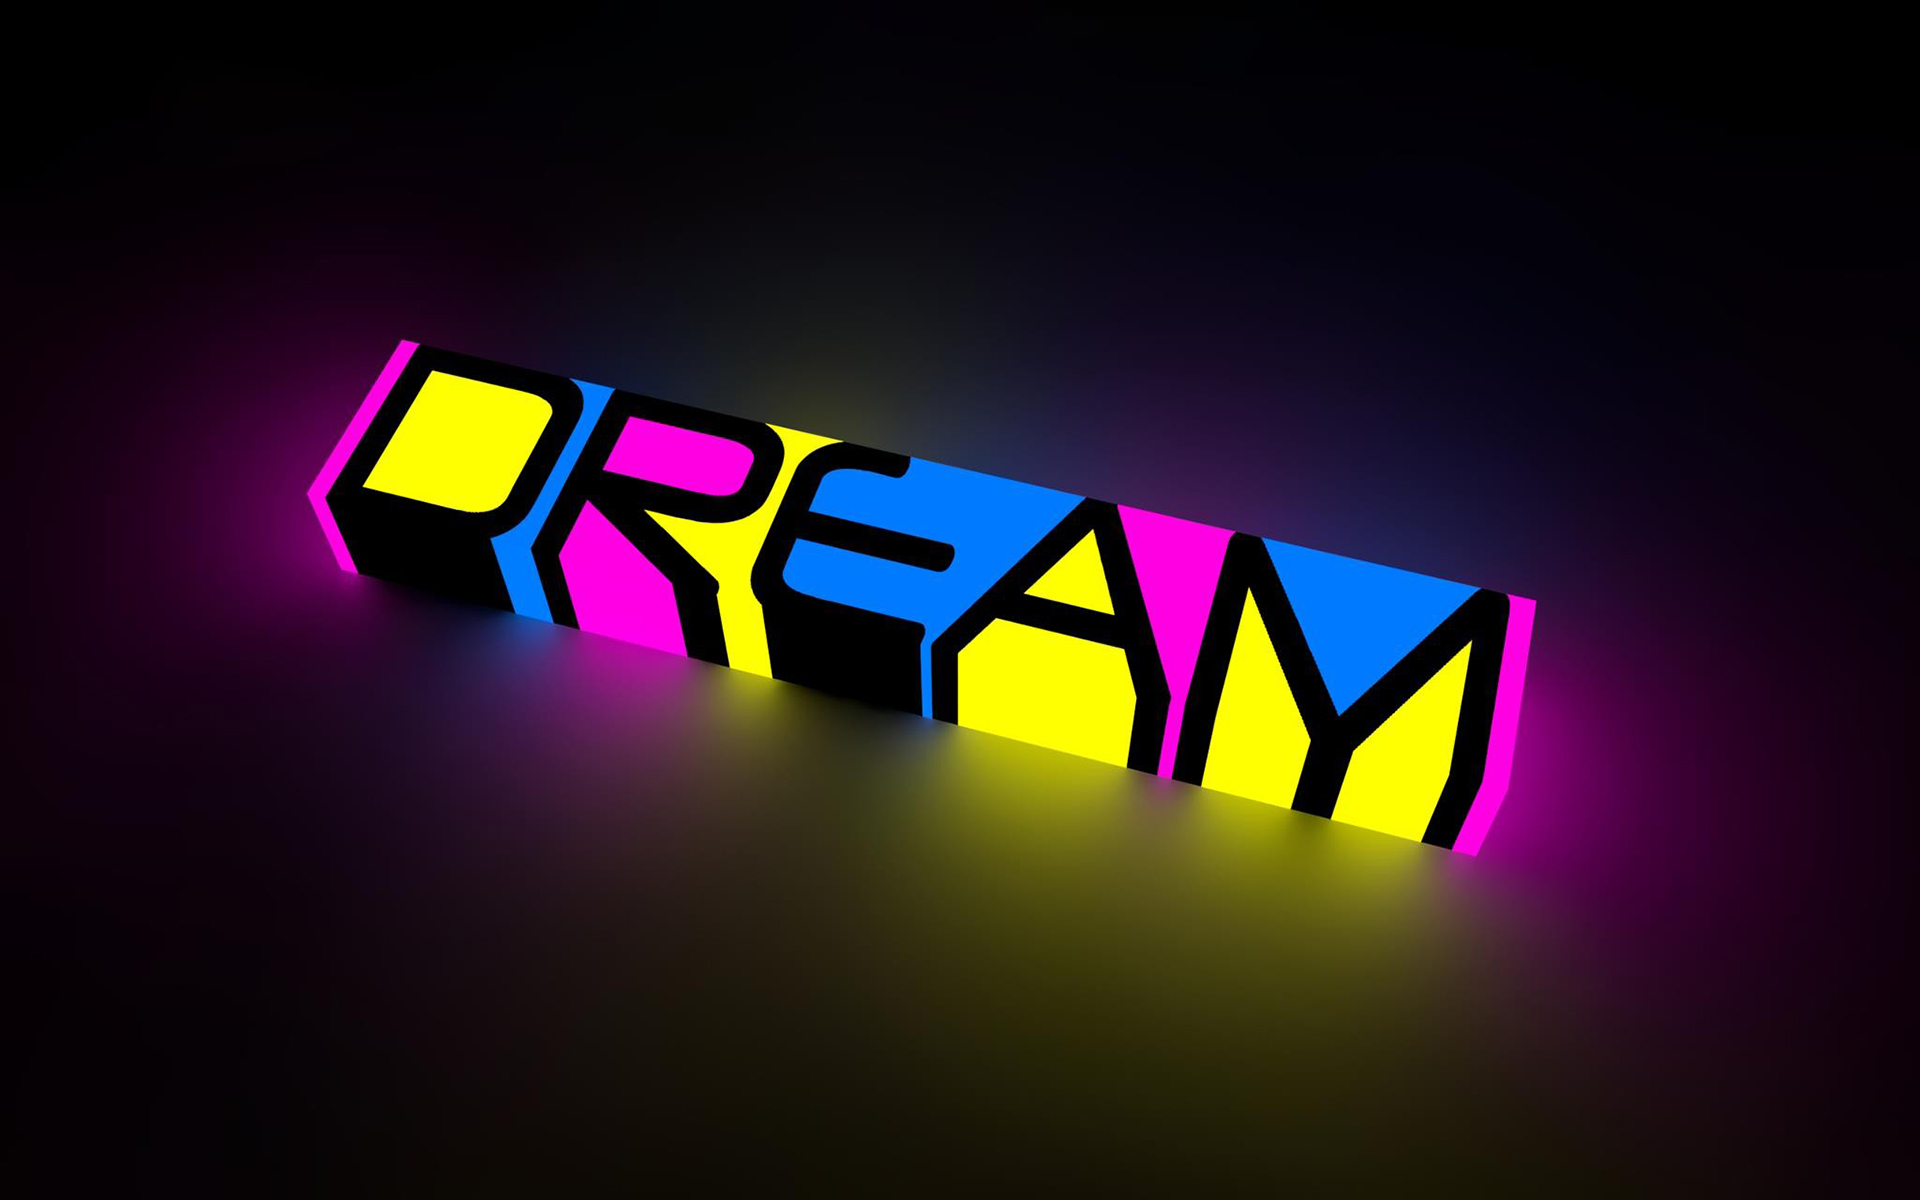 Abstract Dream Color Neon Bright Words Letters